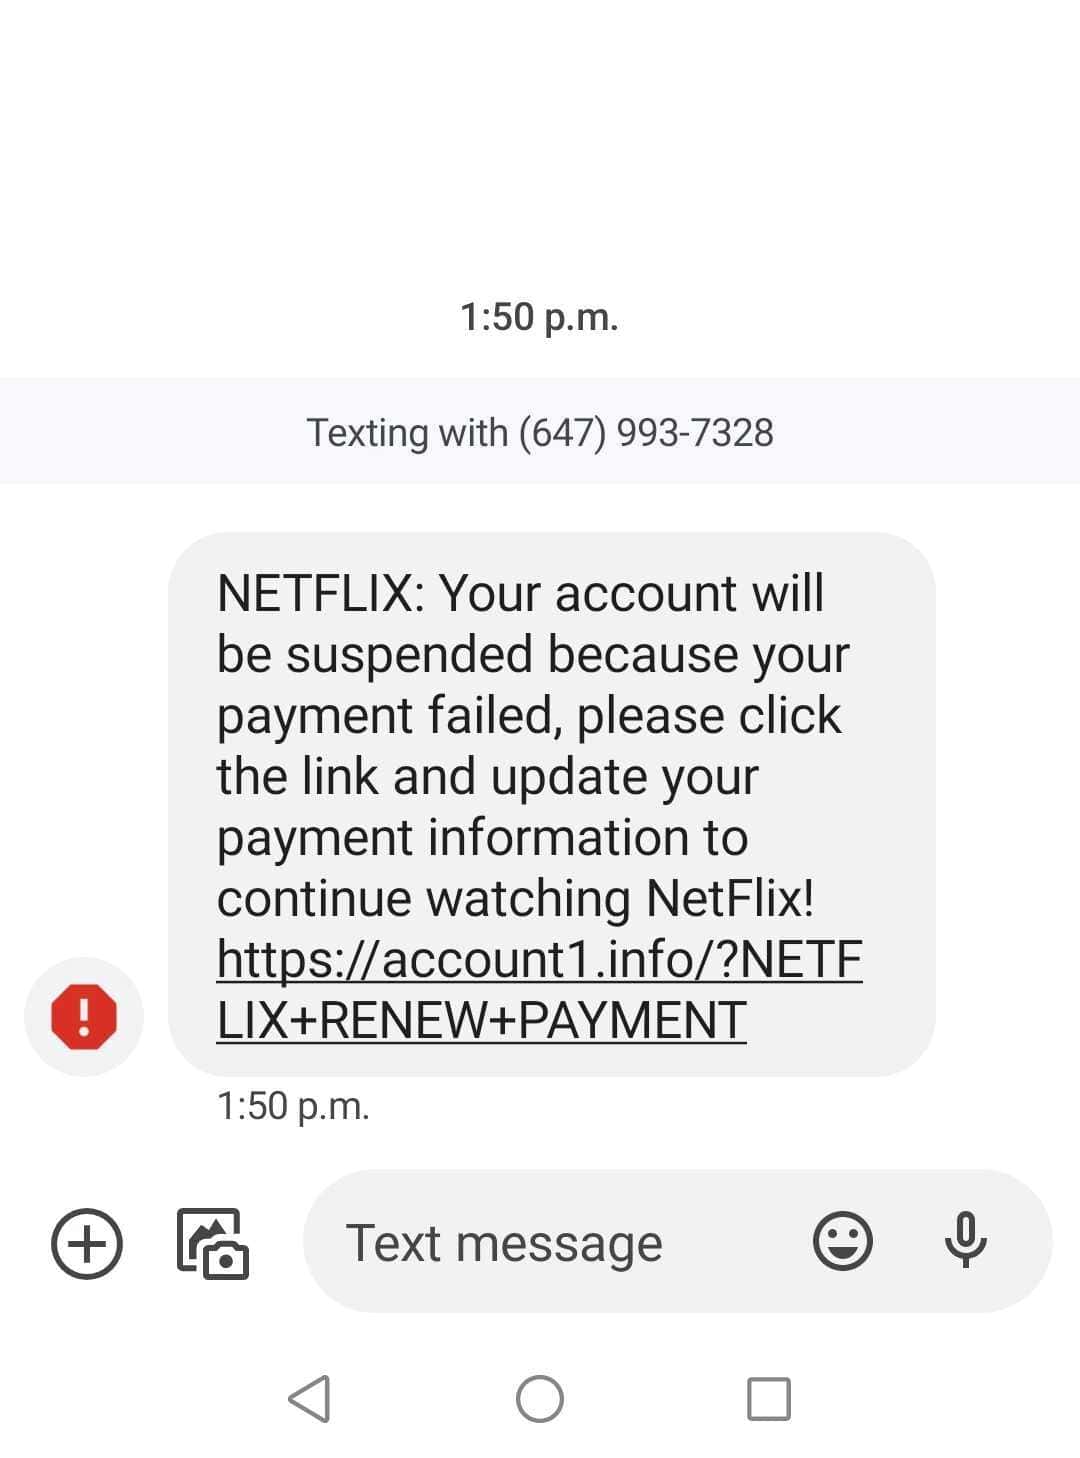 Netflix latest text message scam threatens to cut off service in Ontario 